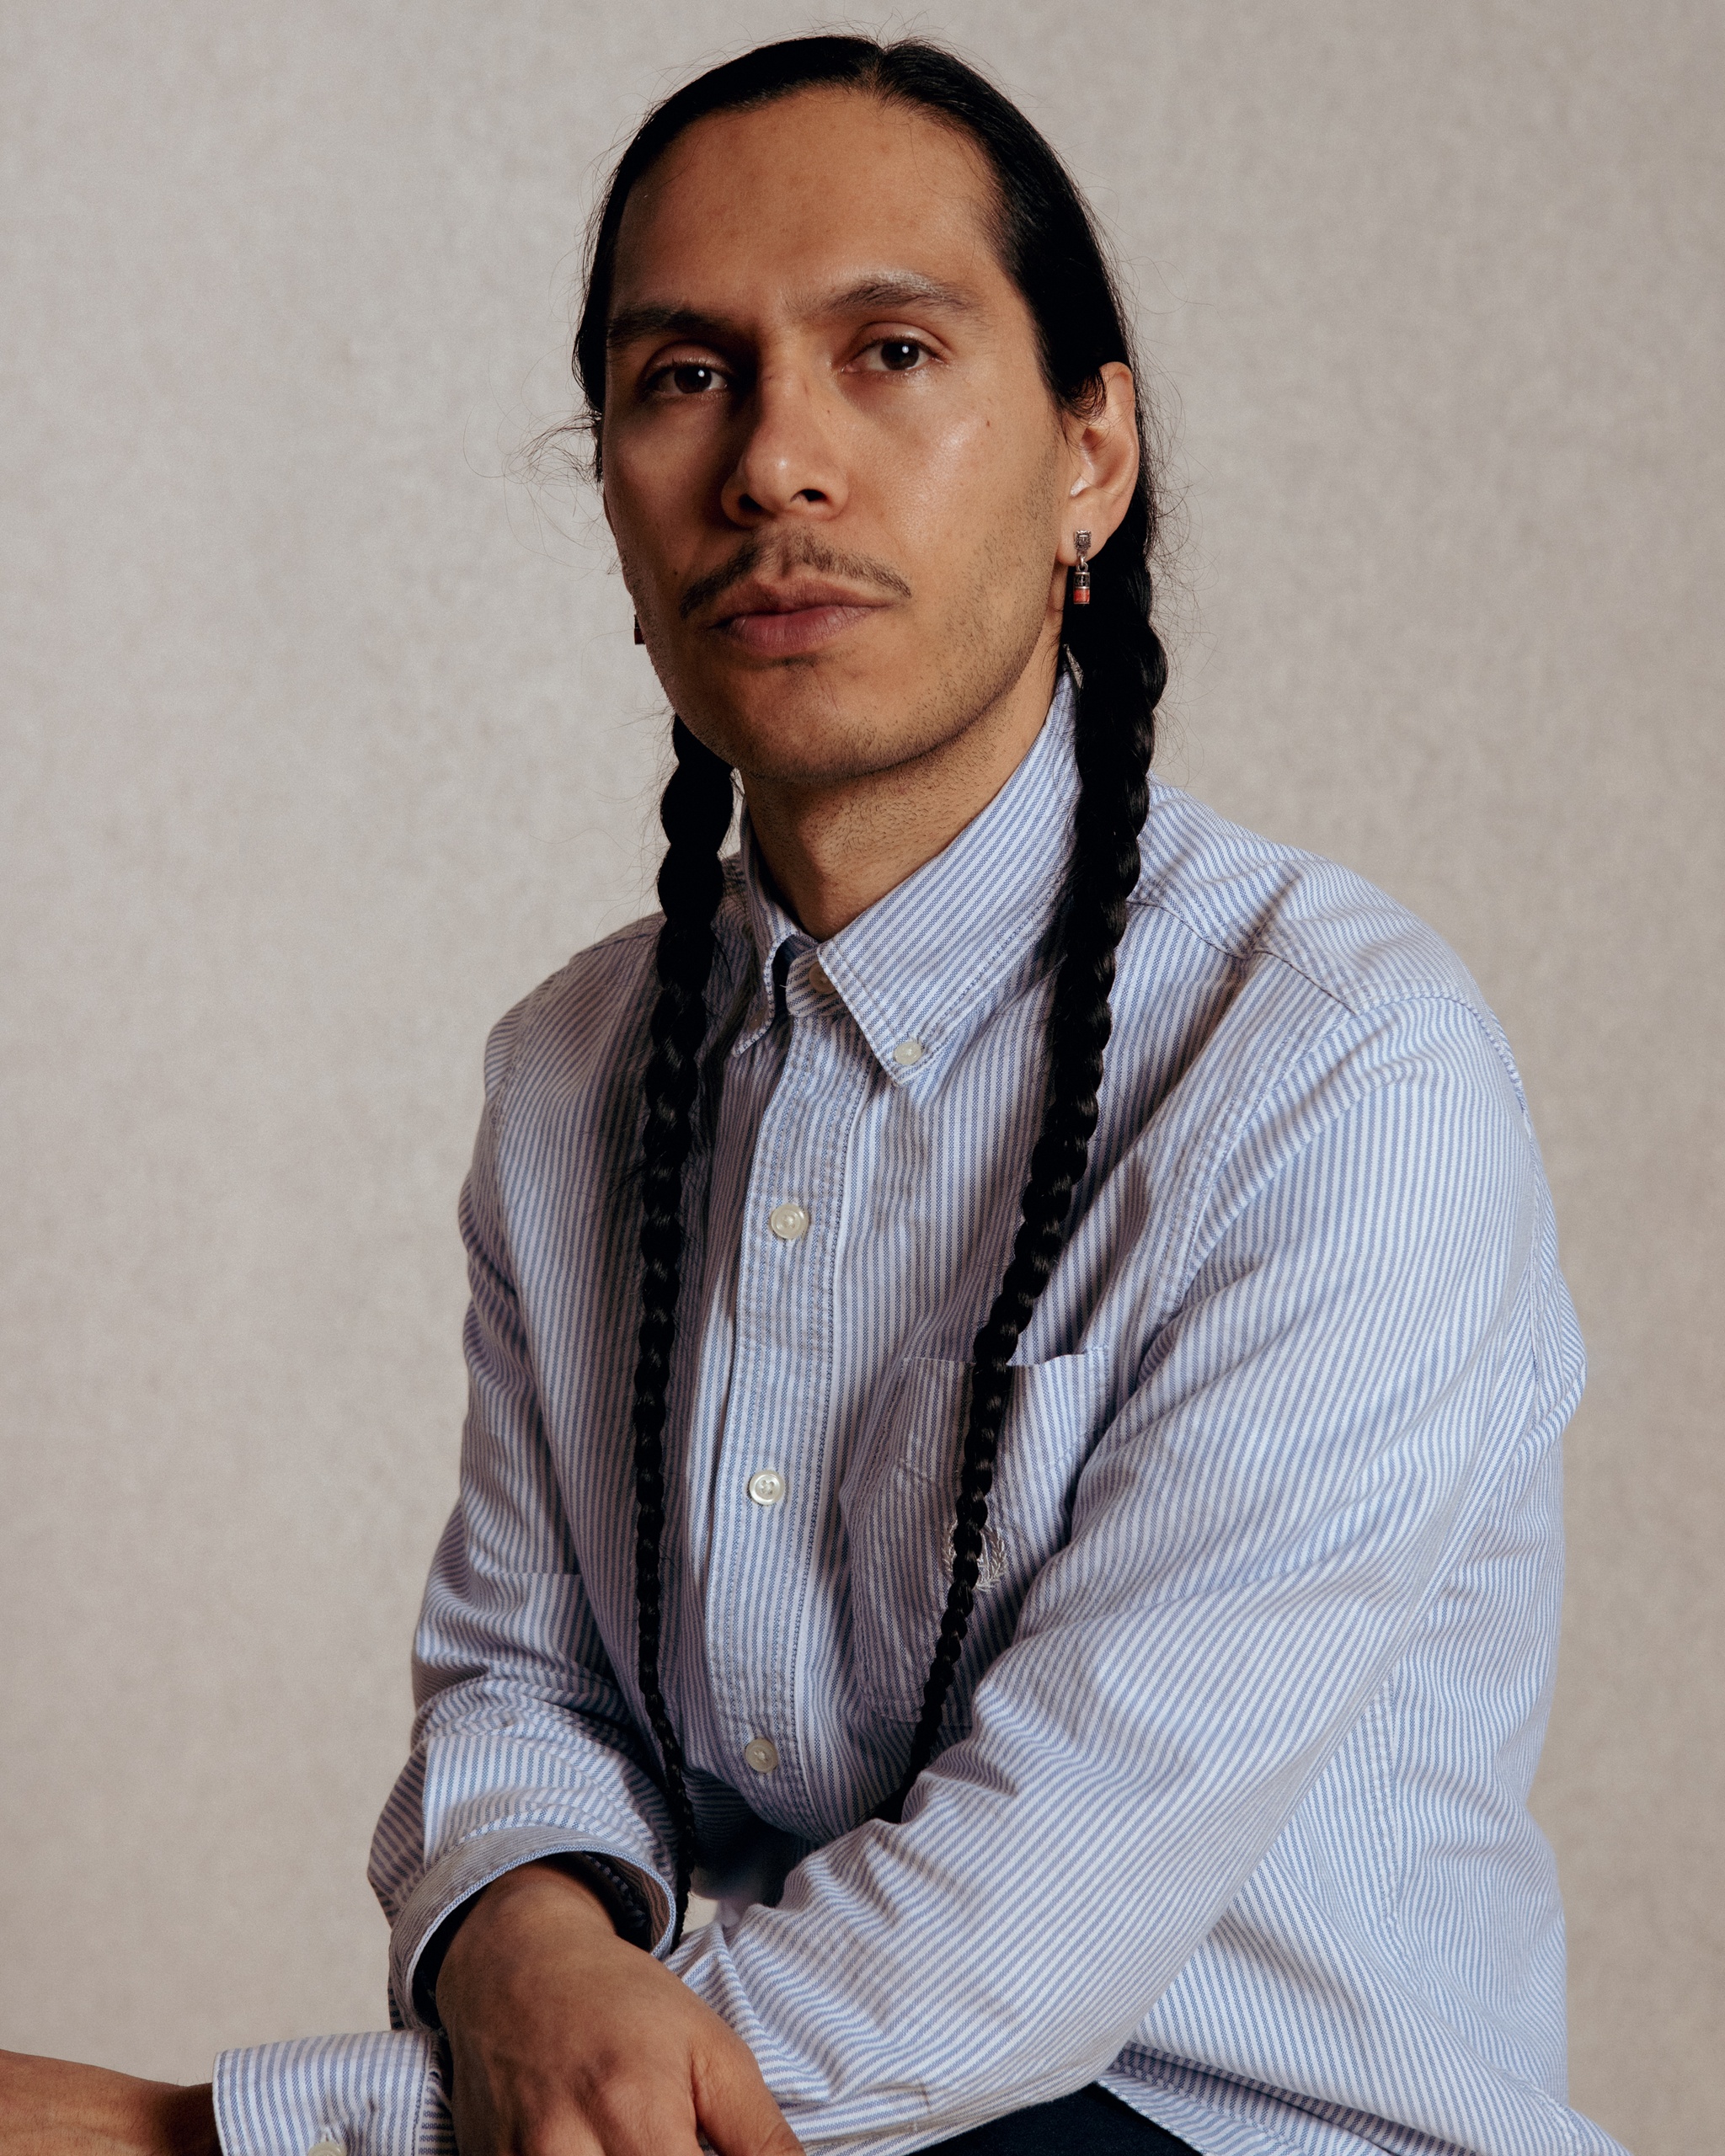 A portrait of artist Armando Guadalupe Cortés, a Mexican man who poses with arms crossed in his lap, facing us. Armando wears his dark hair in two long braids that hang down over either shoulder and wears a light blue button down shirt buttoned to the collar. Photo by Dana Golan 